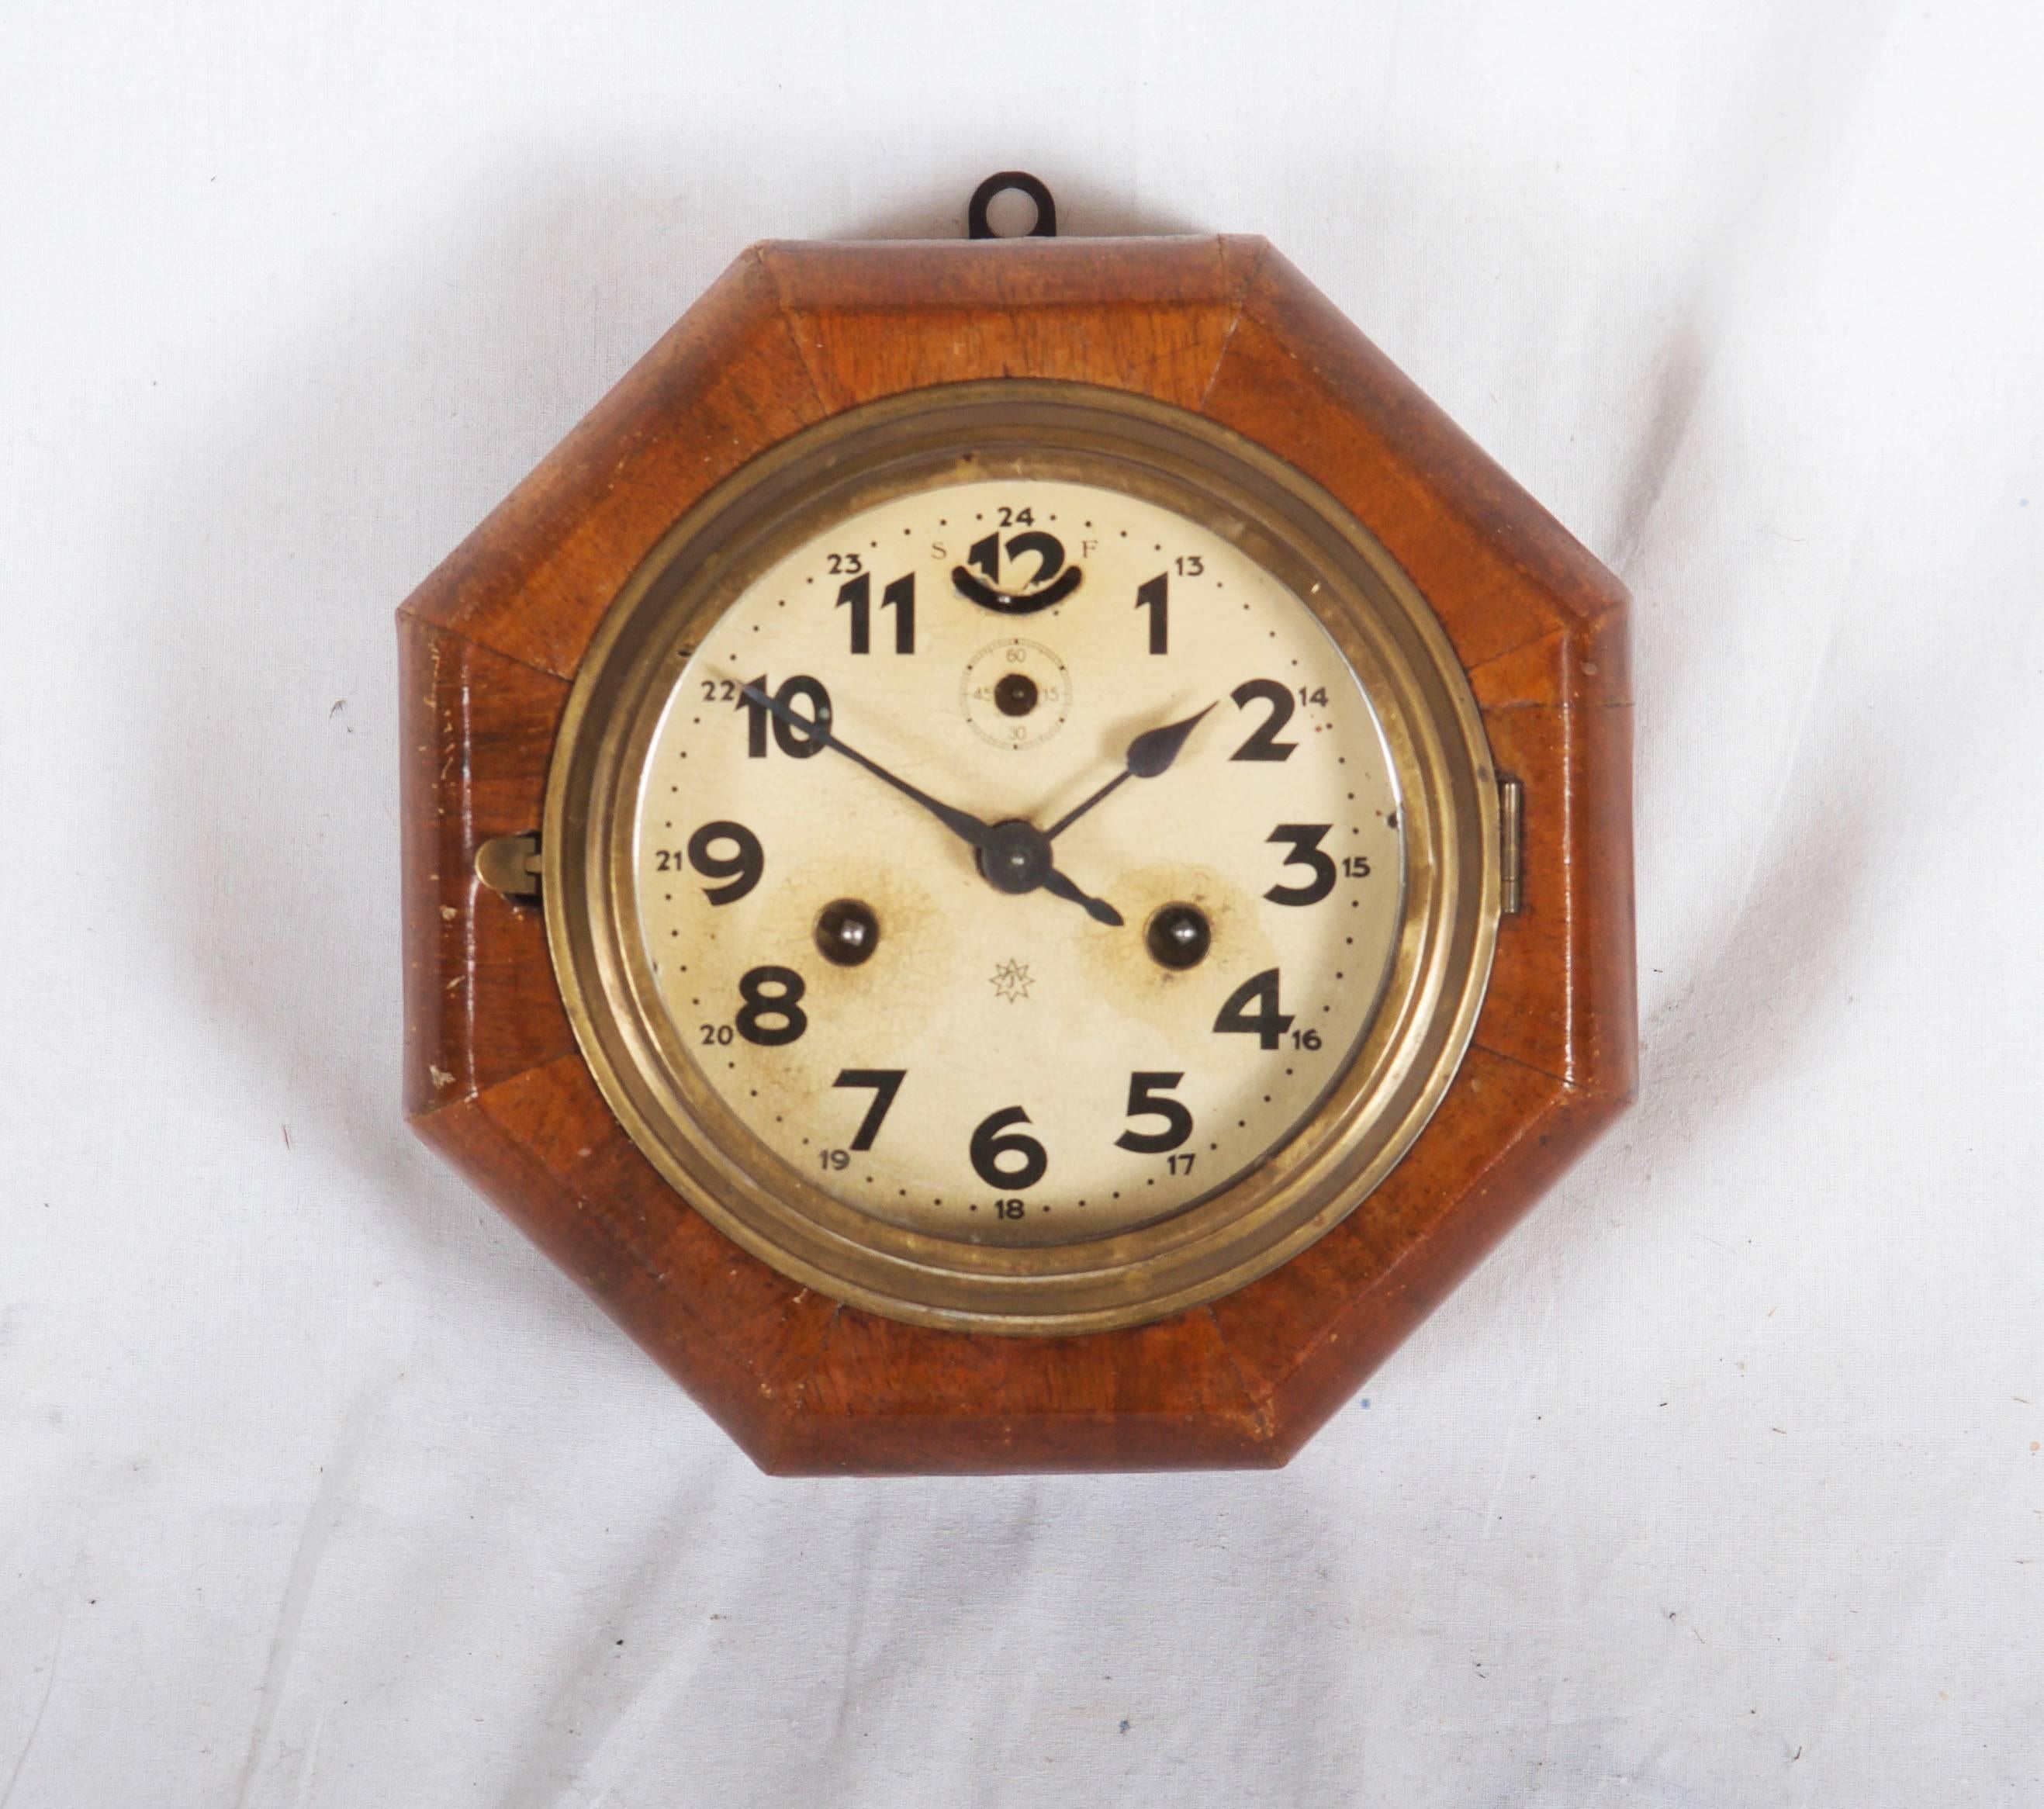 Walnut wood octagonal box, clock face with Arabic numbers, mechanical movement. Stil in original condition but on request also an electrical movement possible.